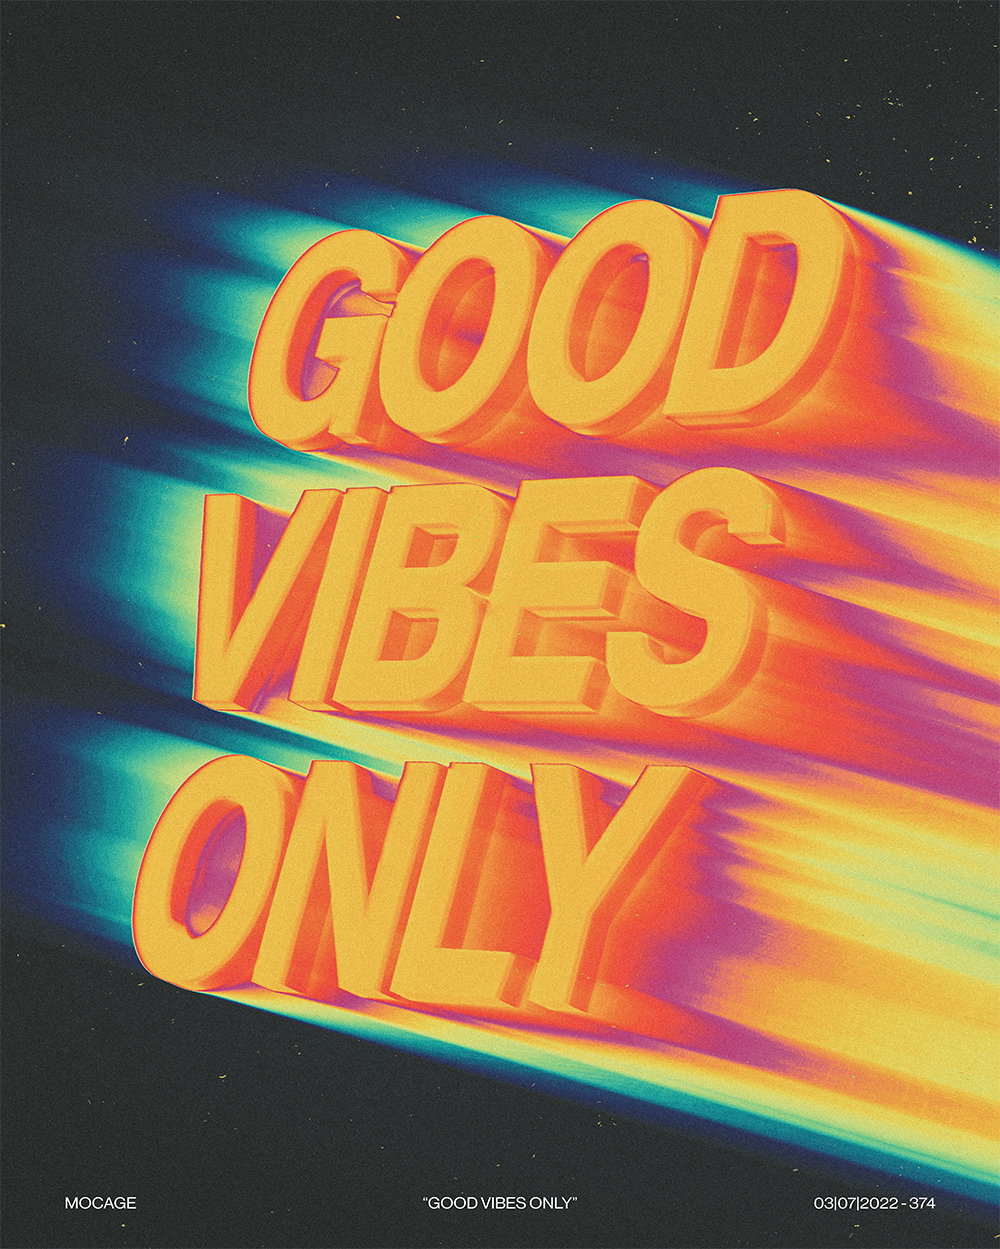 “Good vibes only”